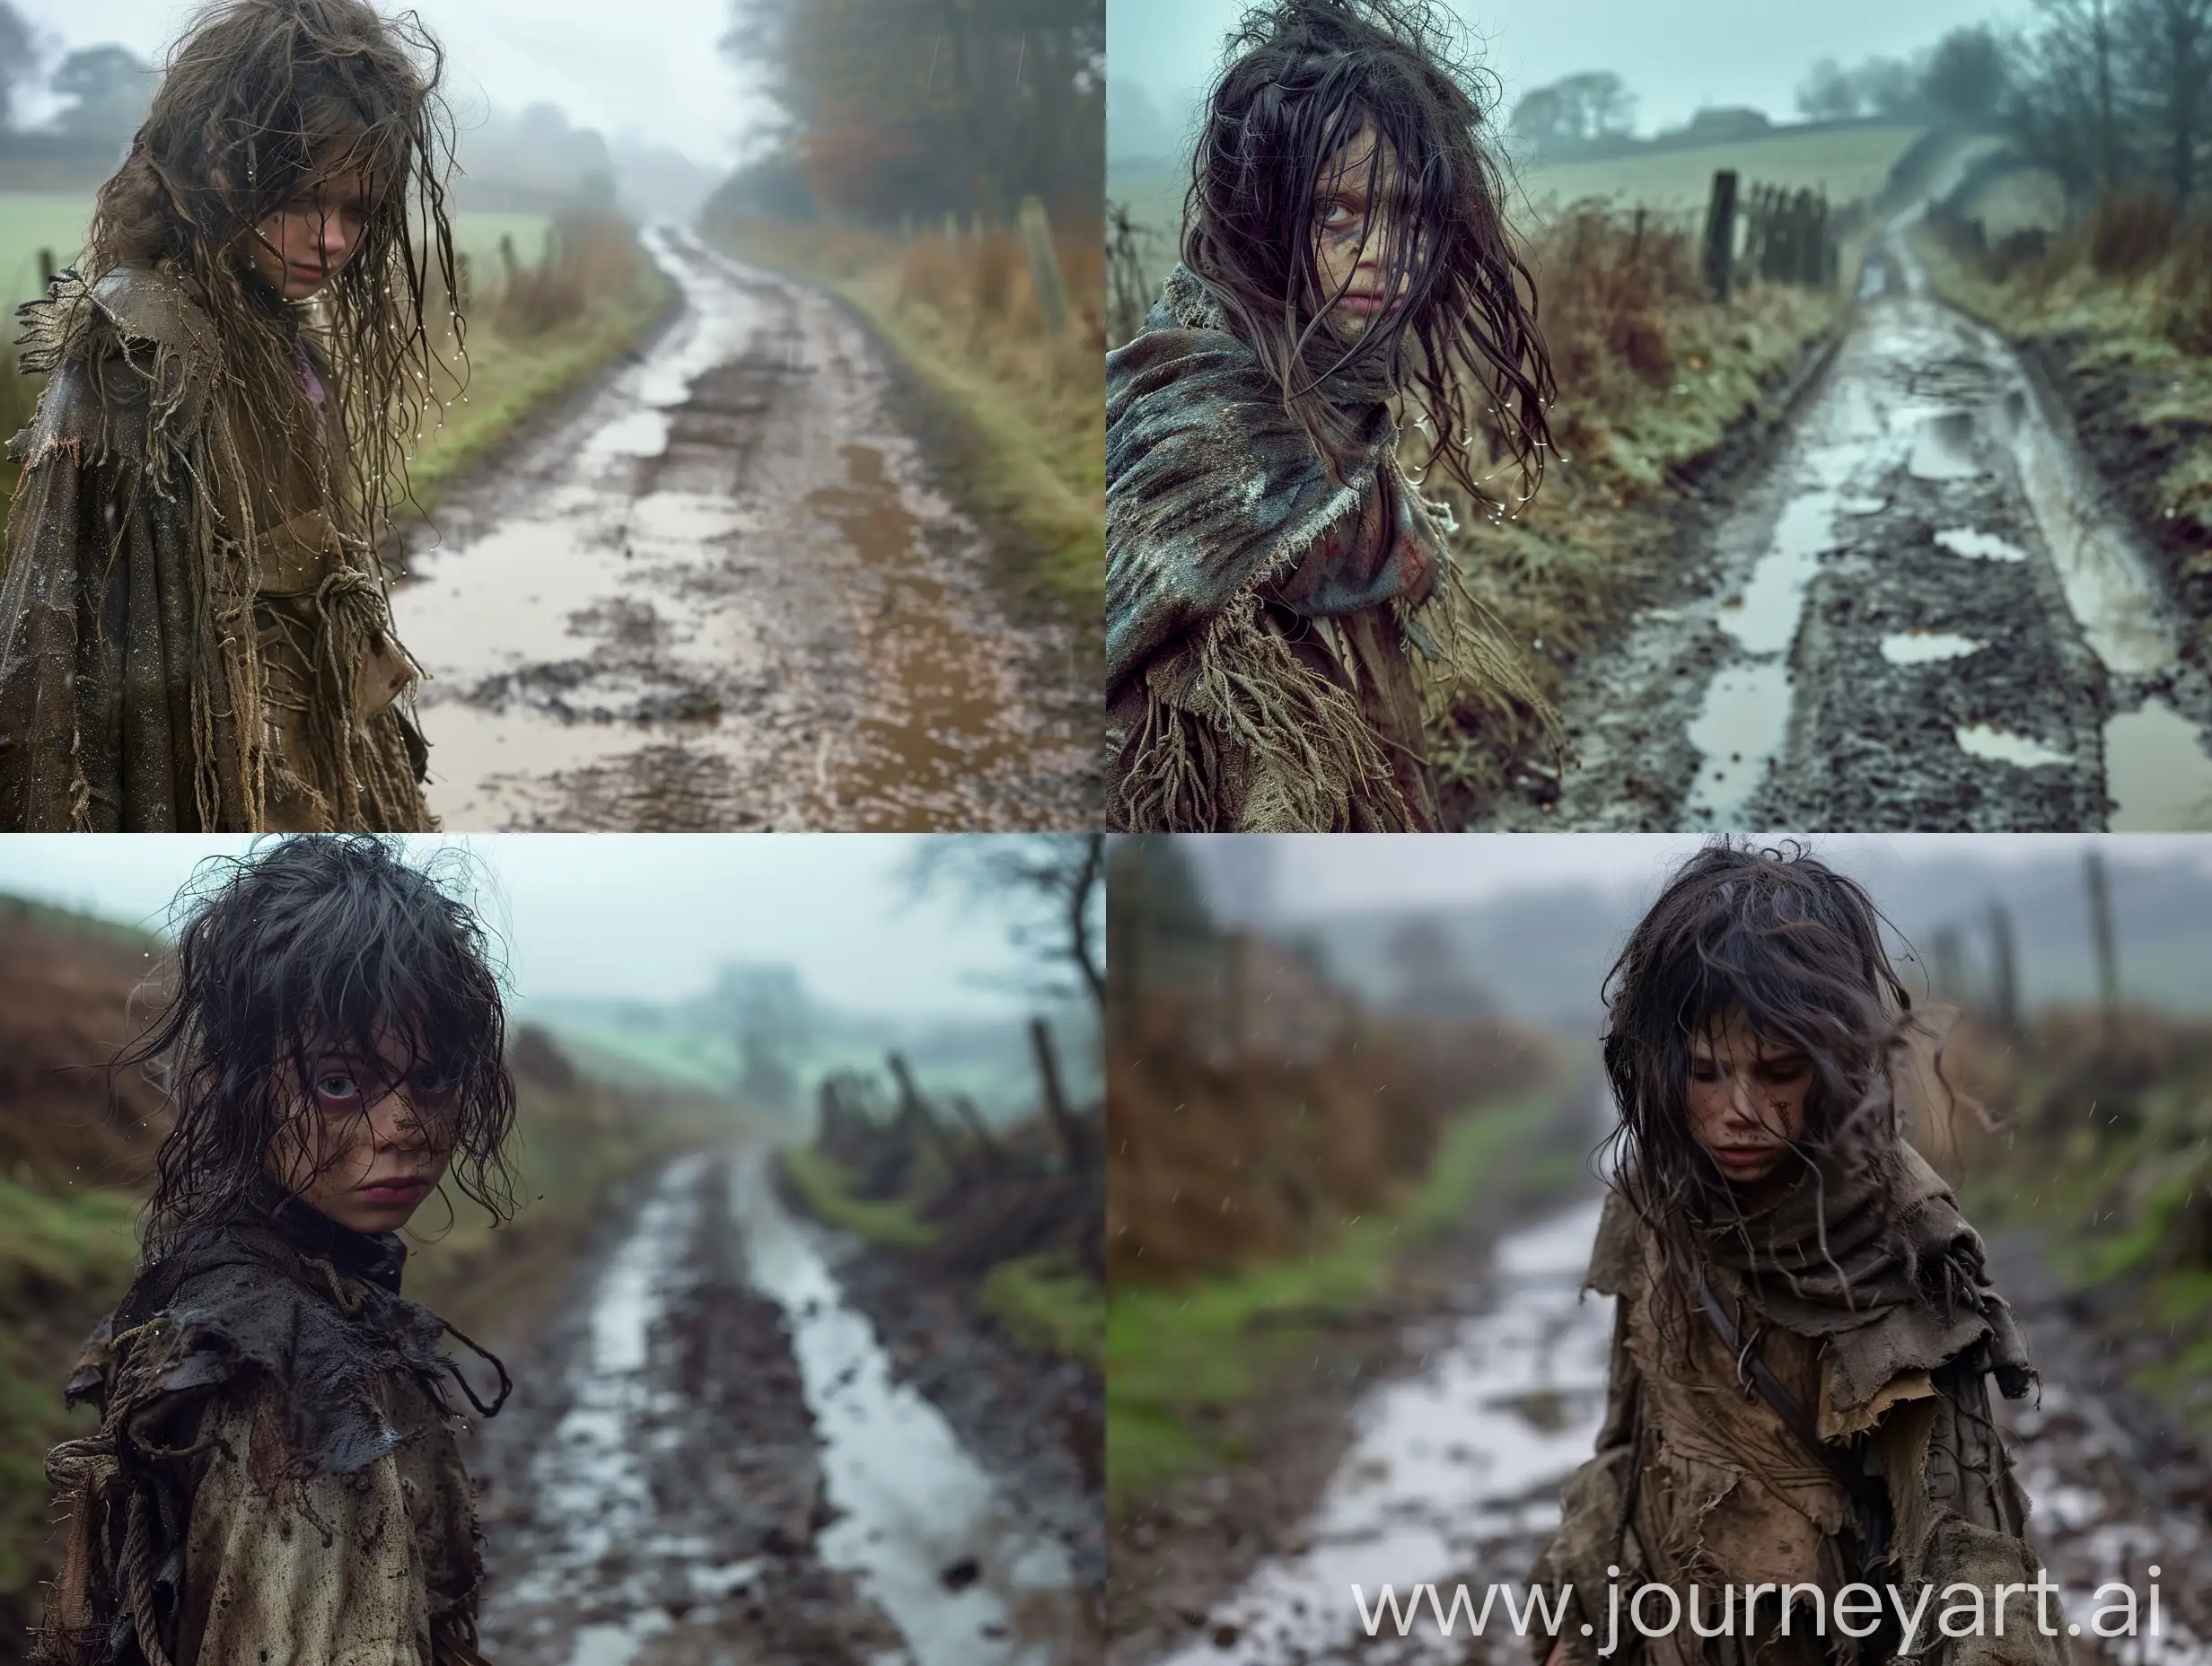 Grim-Young-Witch-Walking-on-Muddy-Road-Medieval-Horror-Film-Still